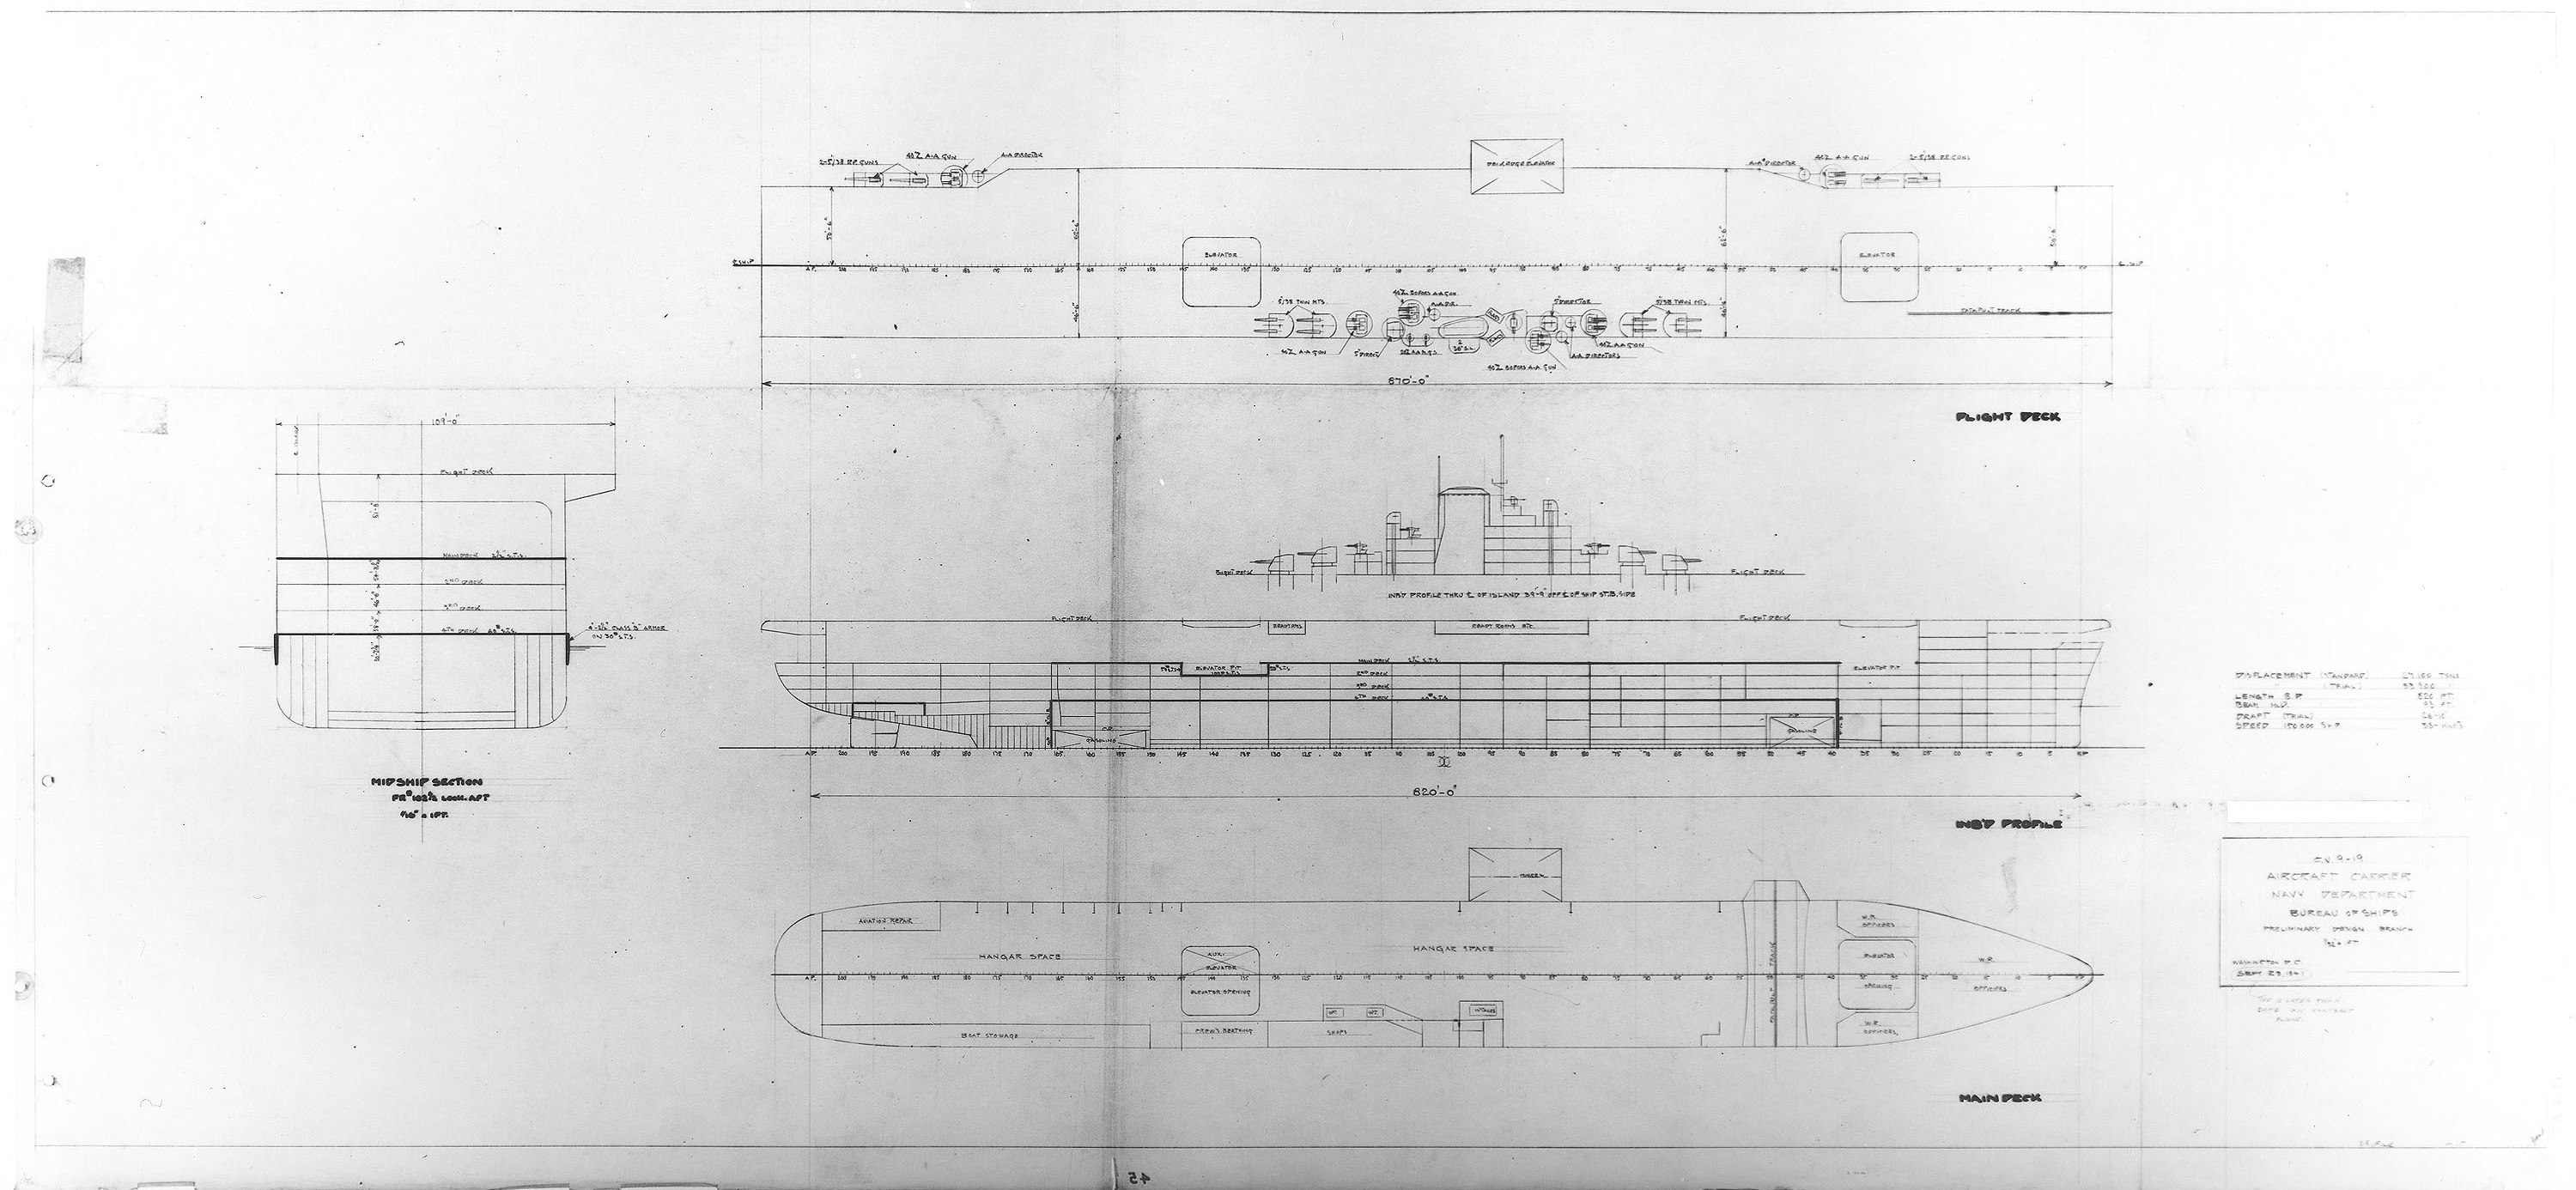 Basic drawing for the proposed new class of United States aircraft carrier, a variation known as Design 9F, that would essentially be adopted for the Essex and the Essex-class, 23 Sep 1941